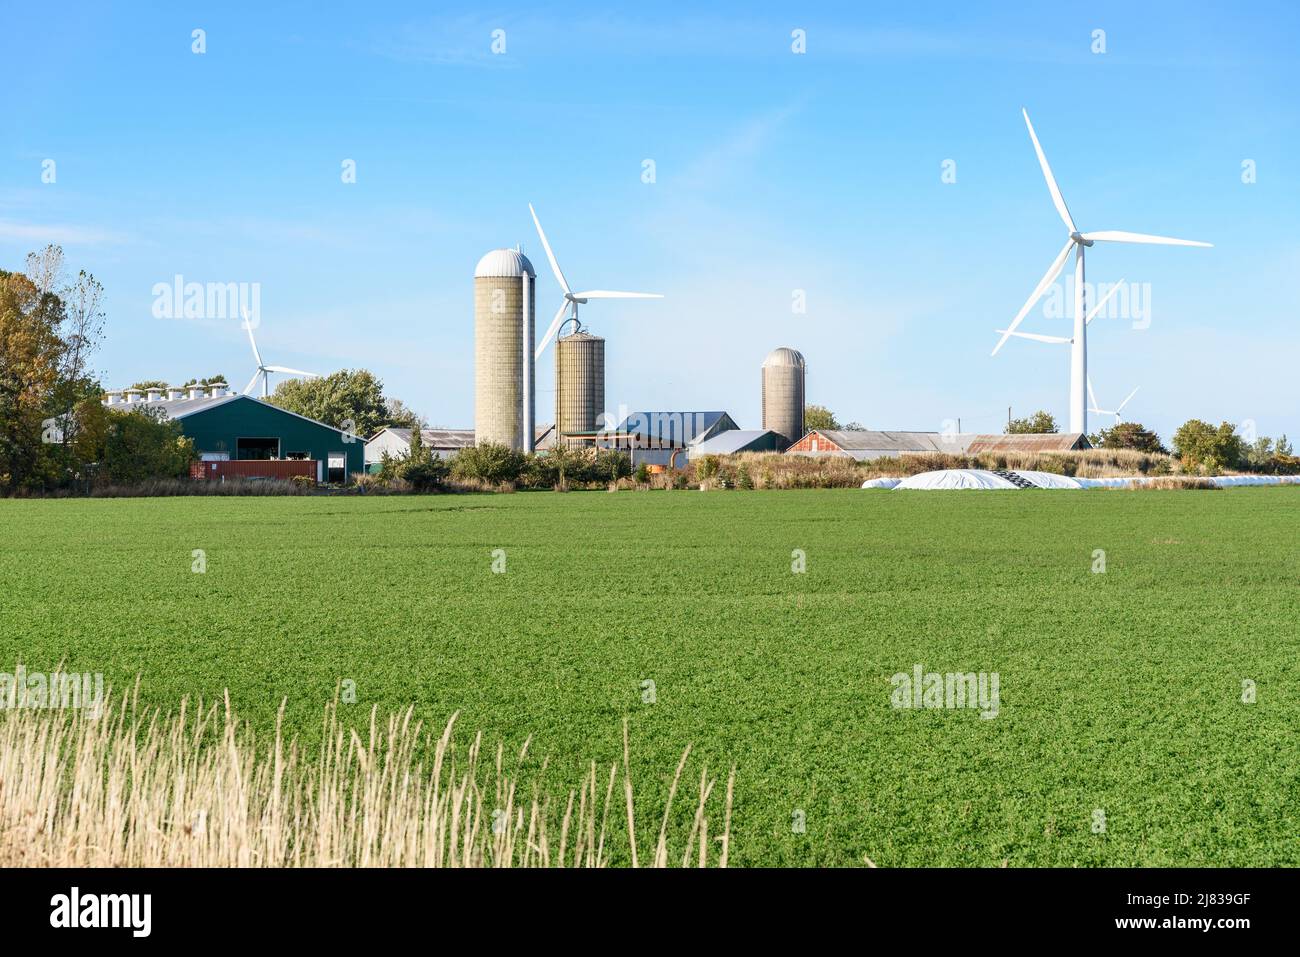 Farm with concrete silos and tall wind turbines in background on a clear autumn day. Angriculture and renewable energy concept. Stock Photo